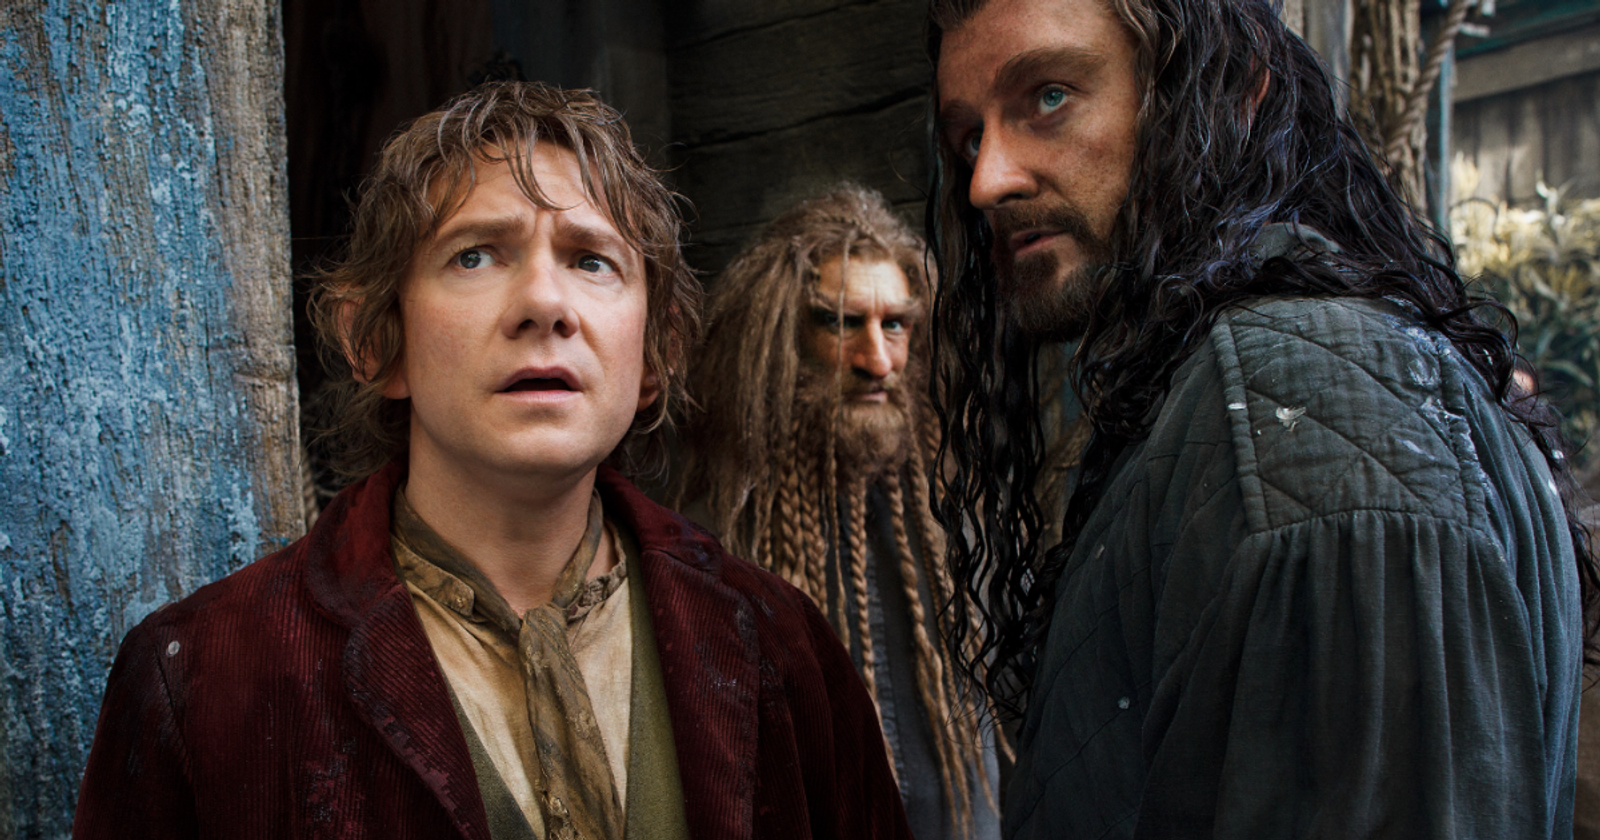 Five Major Differences Between The Hobbit Book and the Movie Trilogy